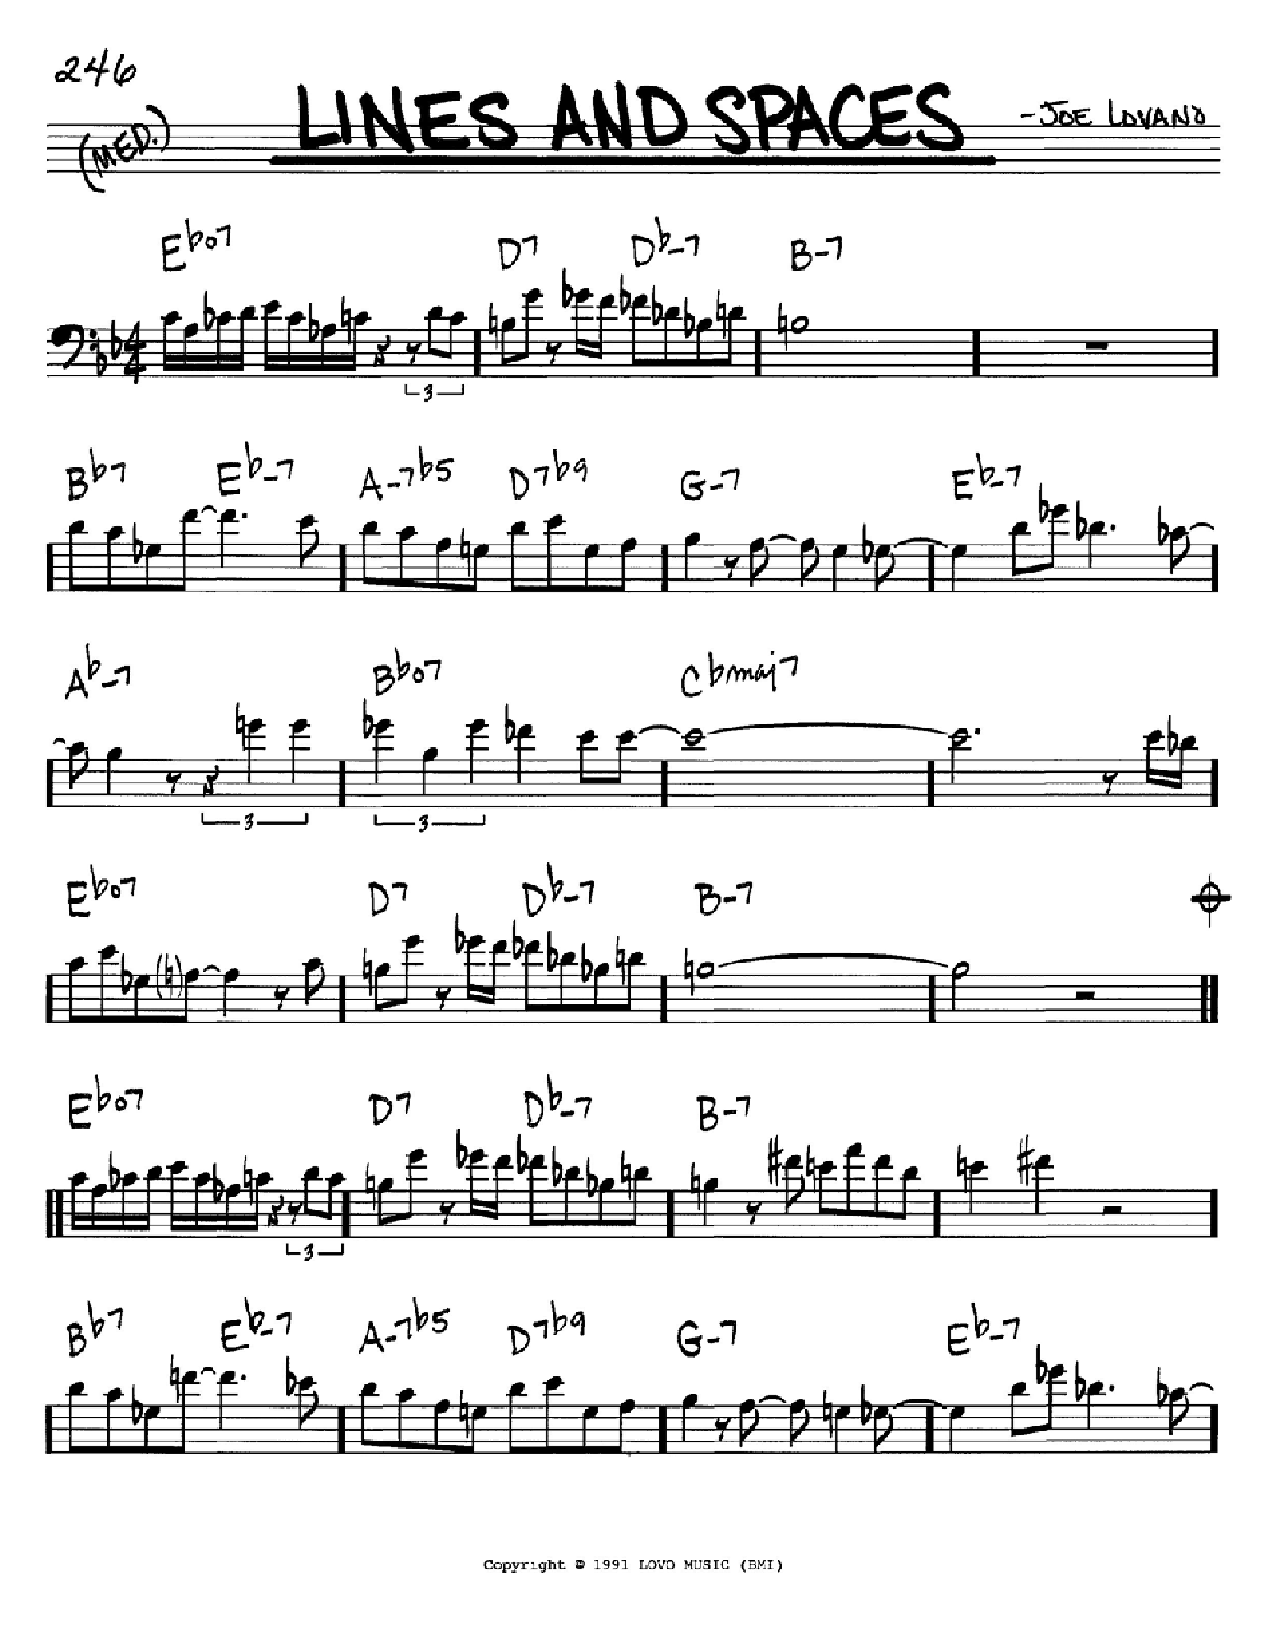 Joe Lovano Lines And Spaces sheet music notes and chords. Download Printable PDF.